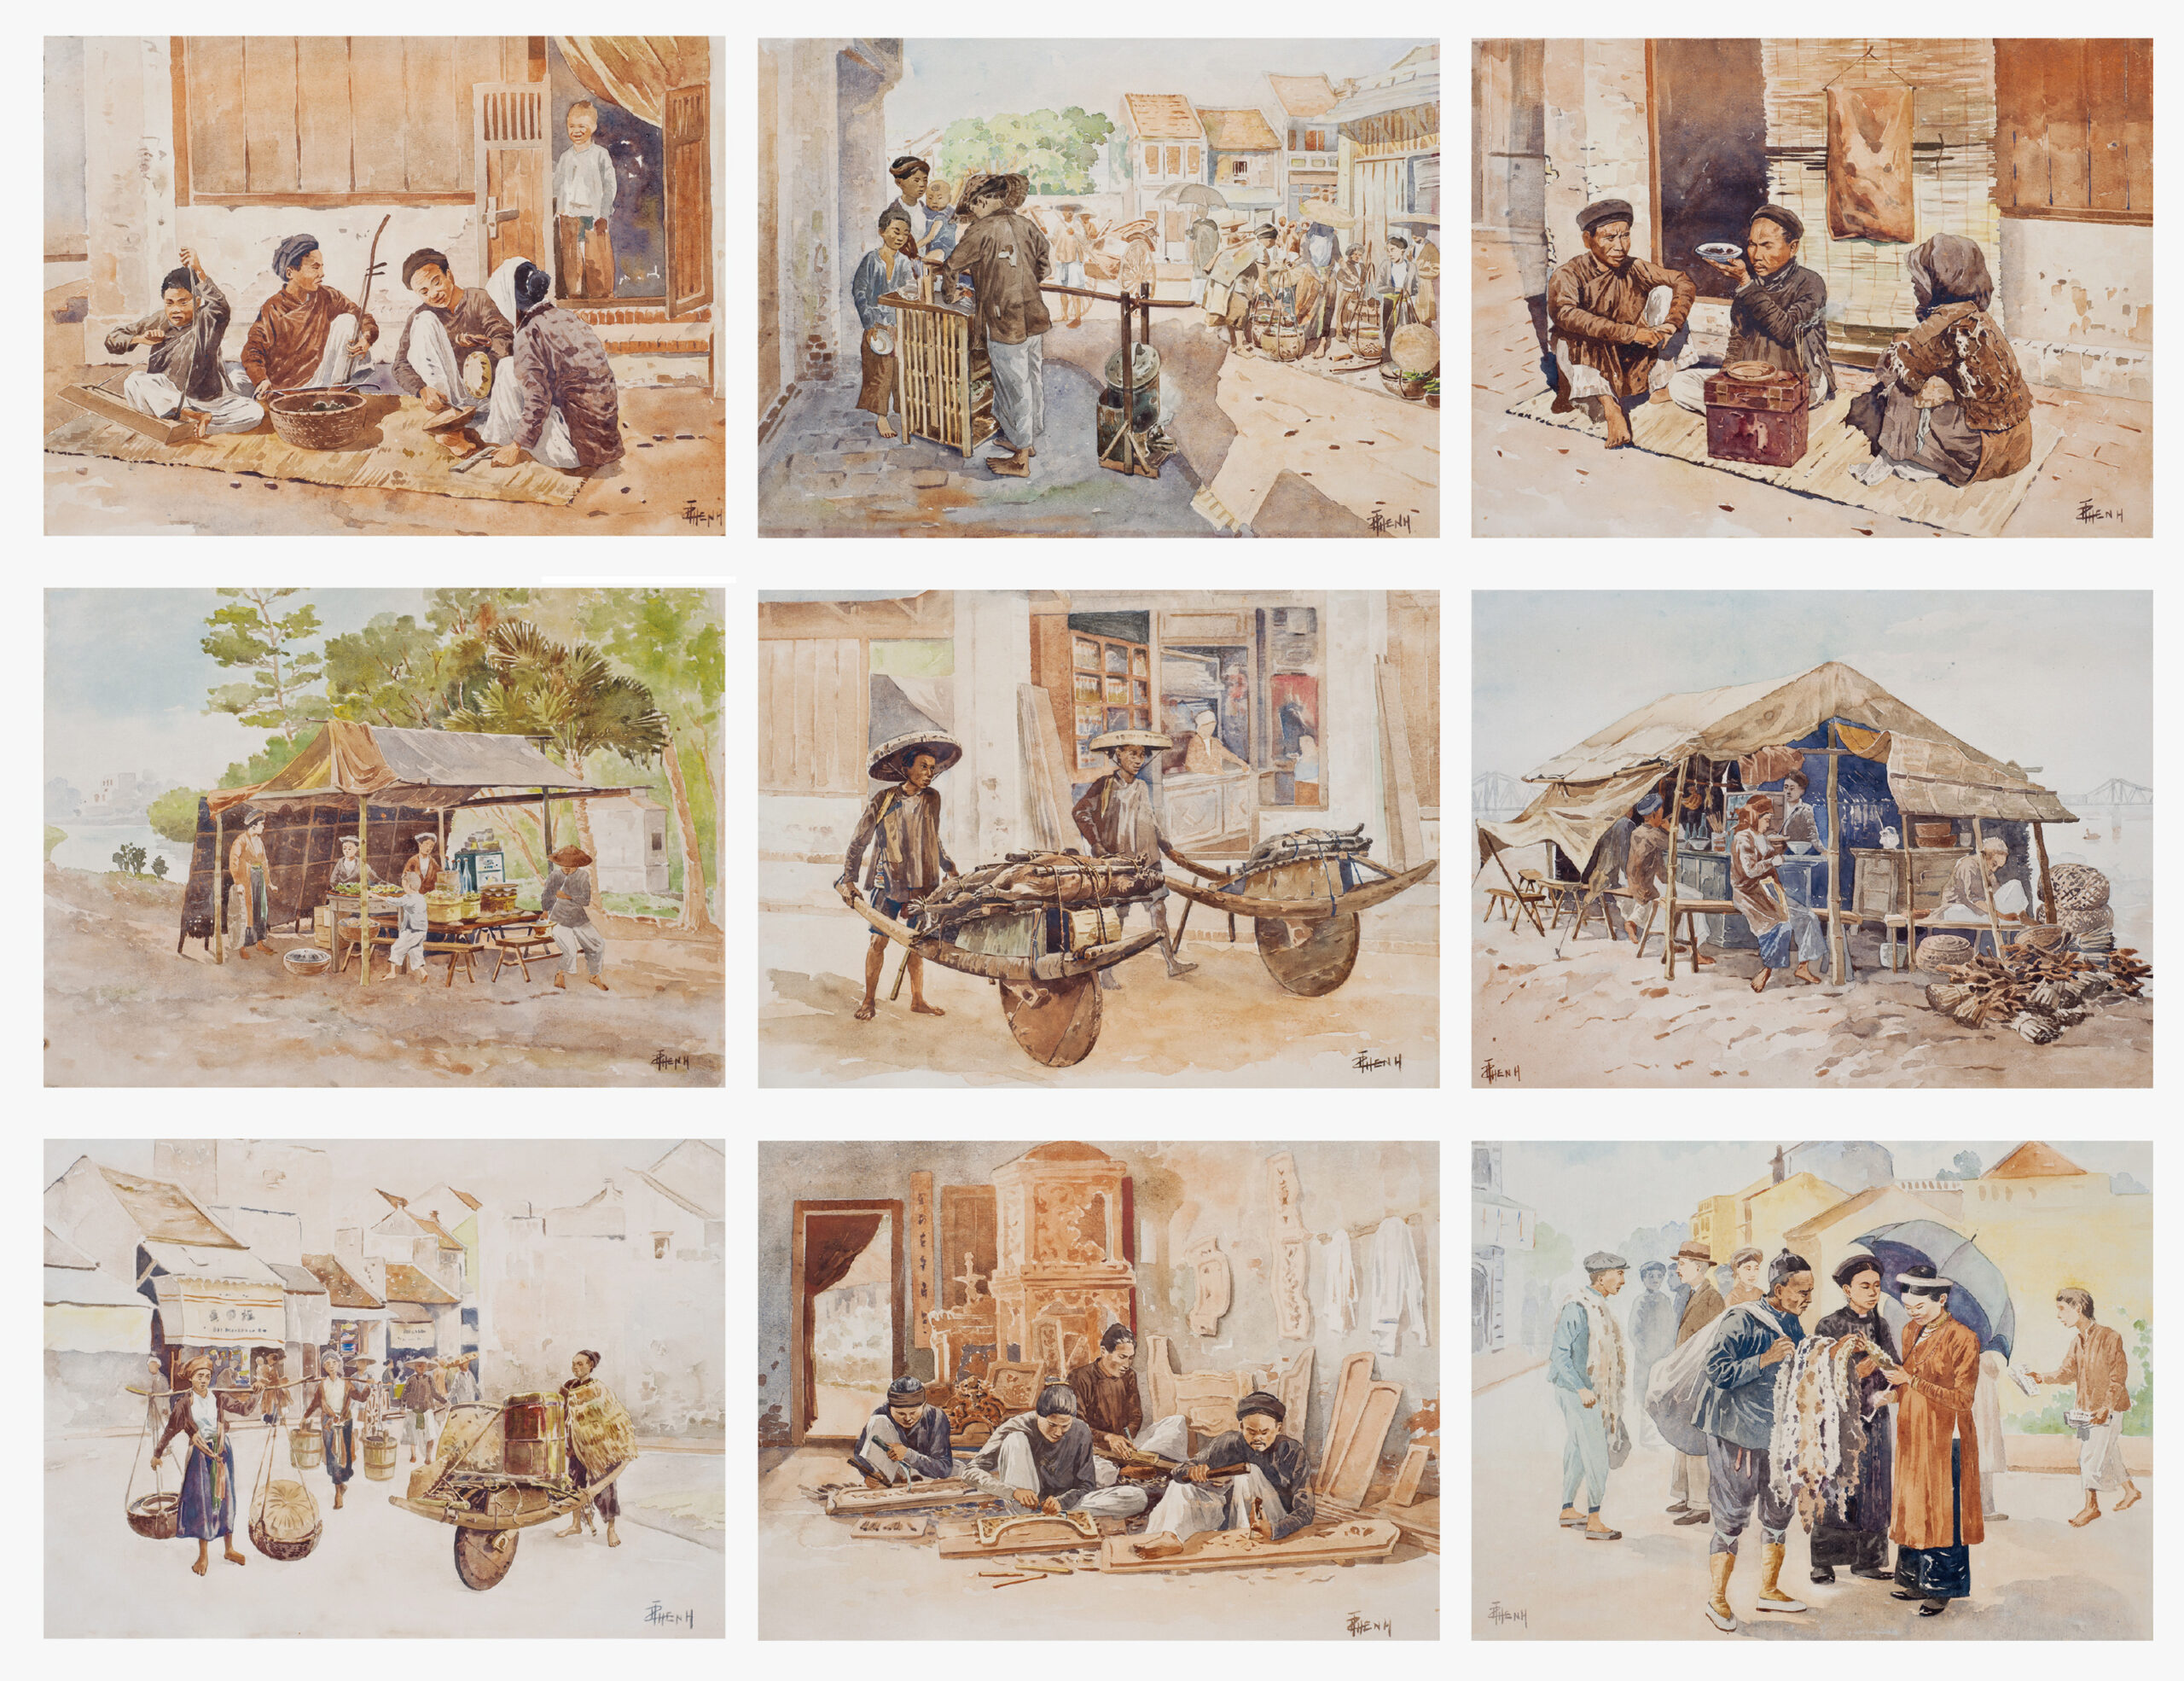 THANG TRAN PHENH (VIETNAMESE, 1890-1972)
Scenes of Old Vietnam
signed 'T T Phenh' (lower right of seven; lower left of two)
nine watercolour on paper
each: 23.5 x 32.5 cm. (9 ½ x 13 in.)
(9)